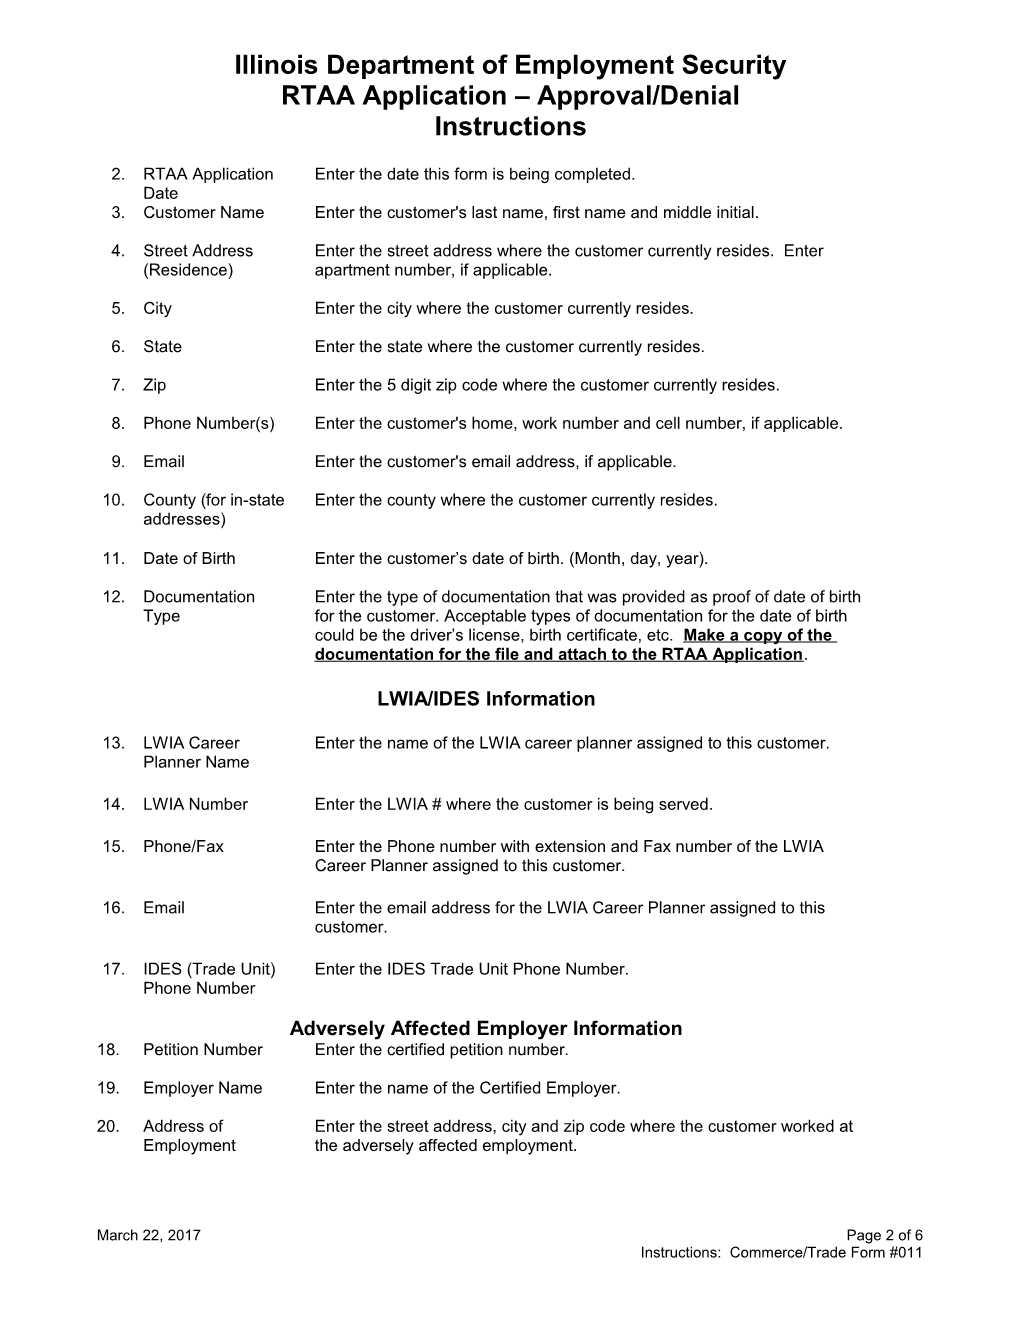 Form #011 IDES RTAA Application - Approval/Denial Instructions (MS Word) 12-01-13